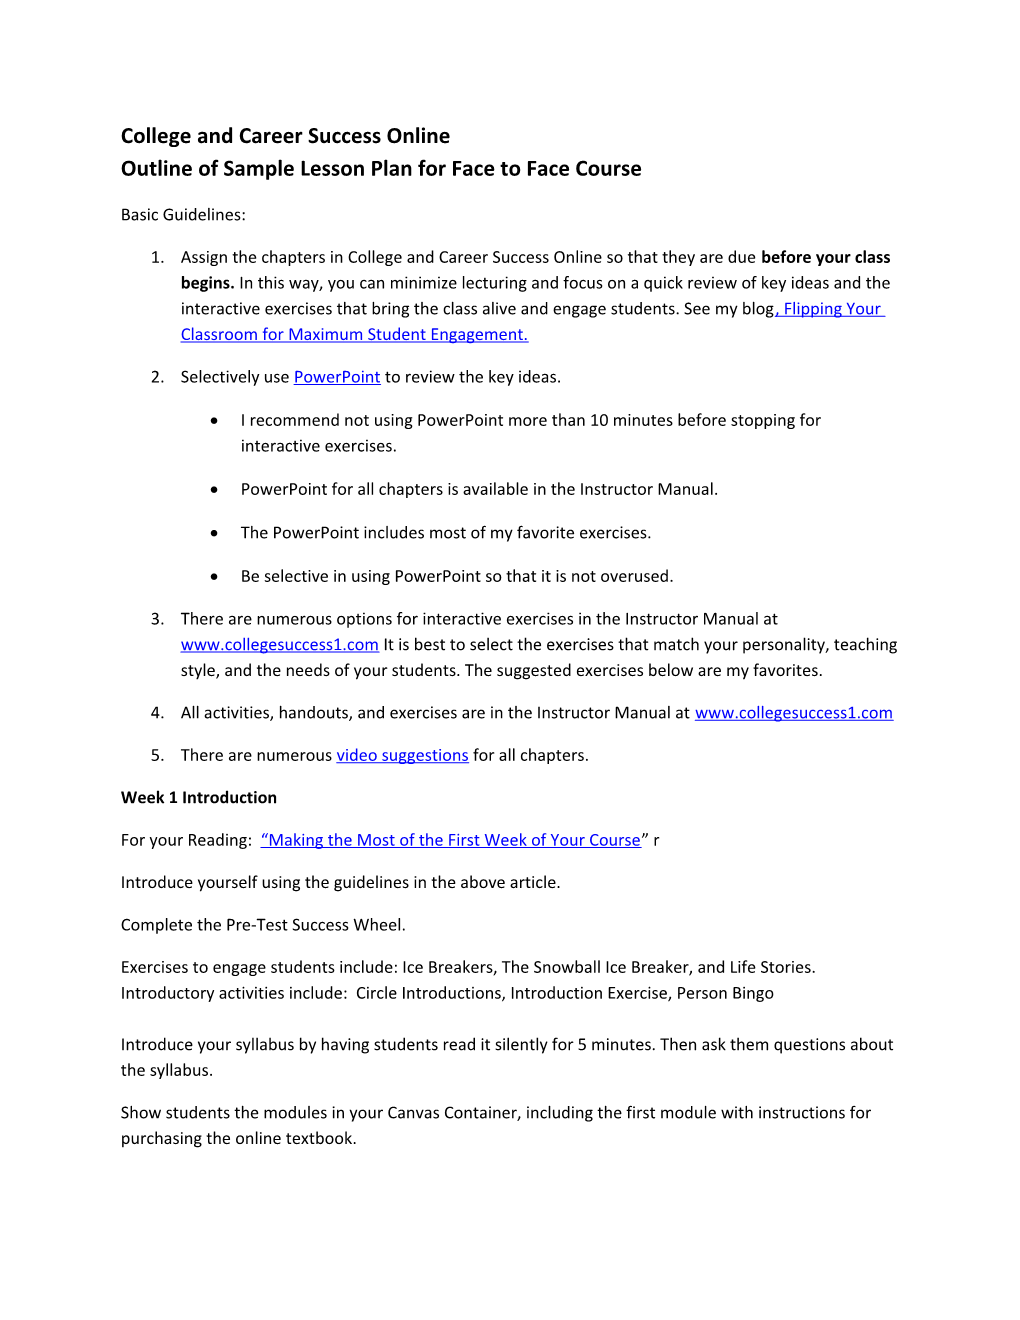 College and Career Success Online Outline of Sample Lesson Plan for Face to Face Course